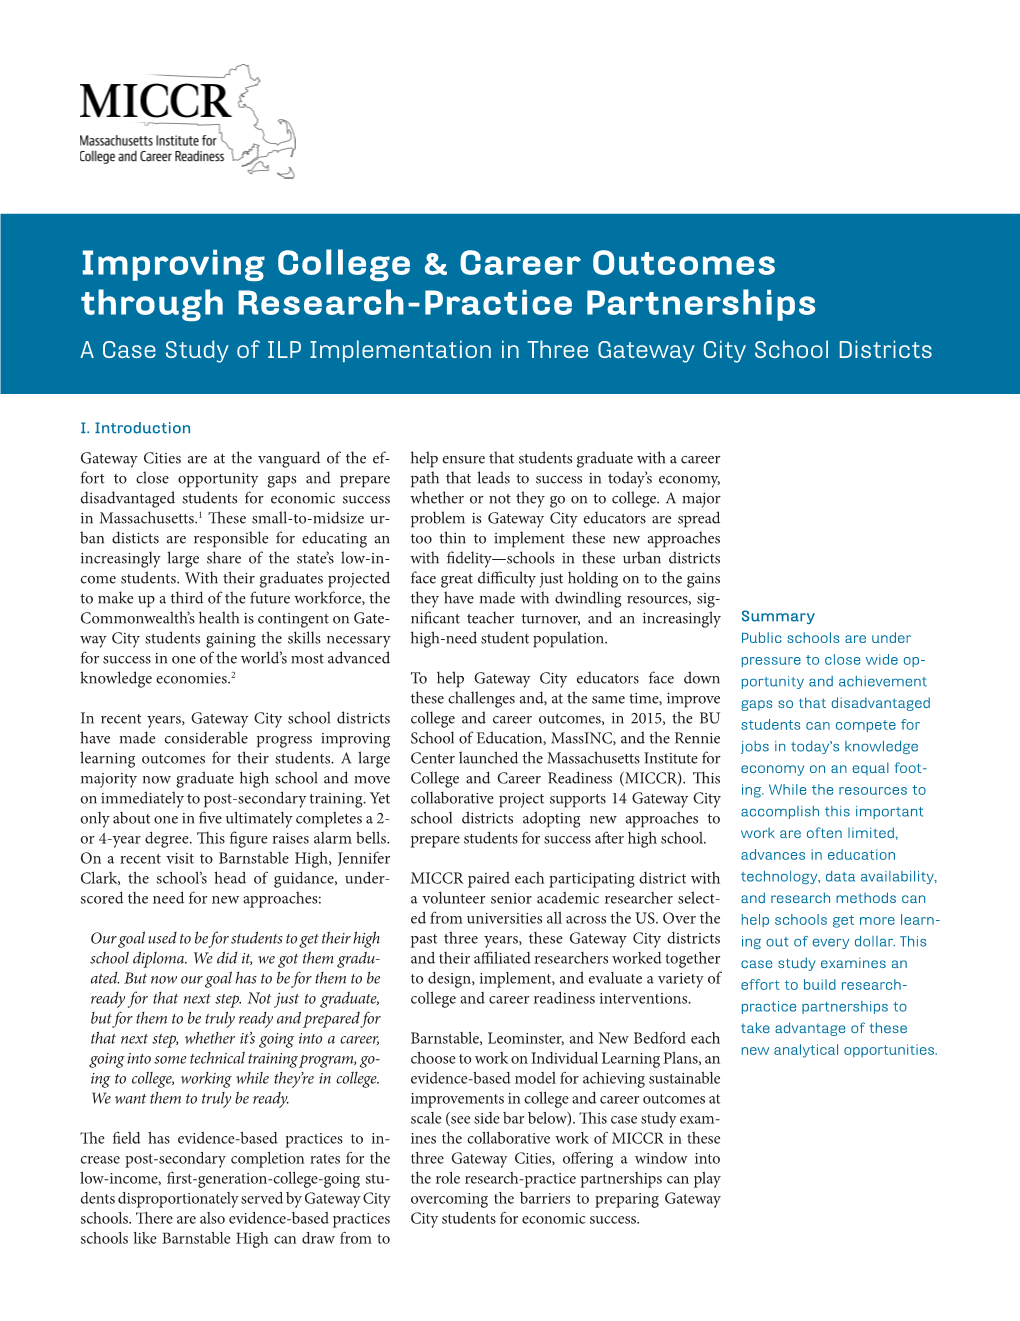 Improving College & Career Outcomes Through Research